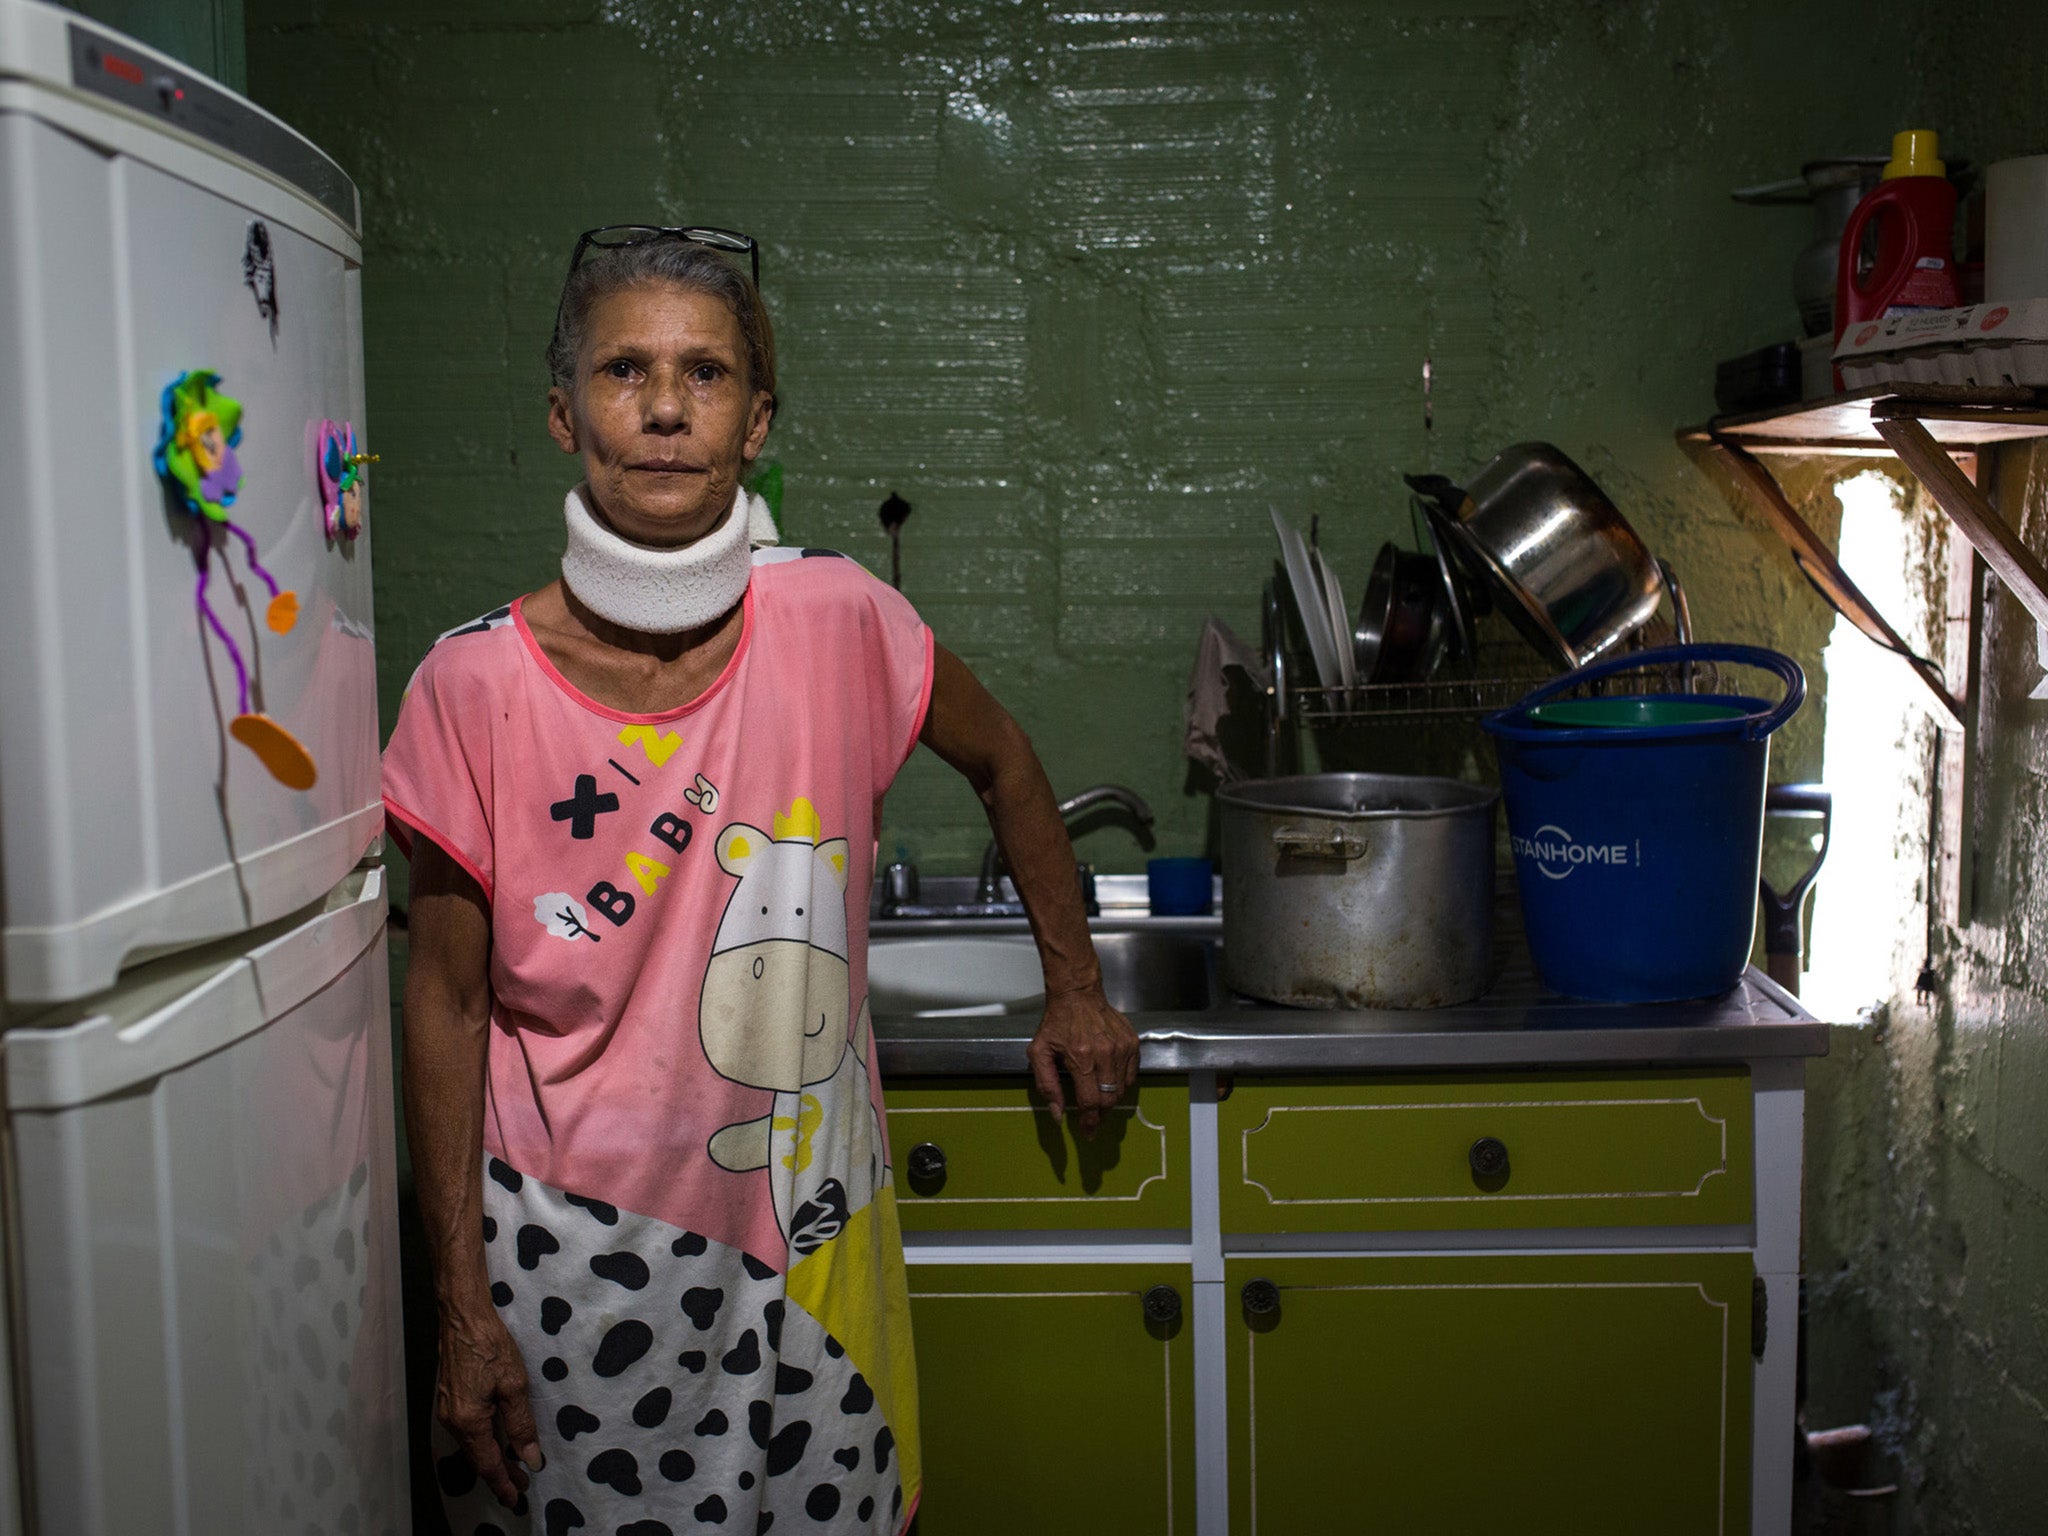 For people like Zulay Perez, ordinary life in Venezuela has become an increasing struggle